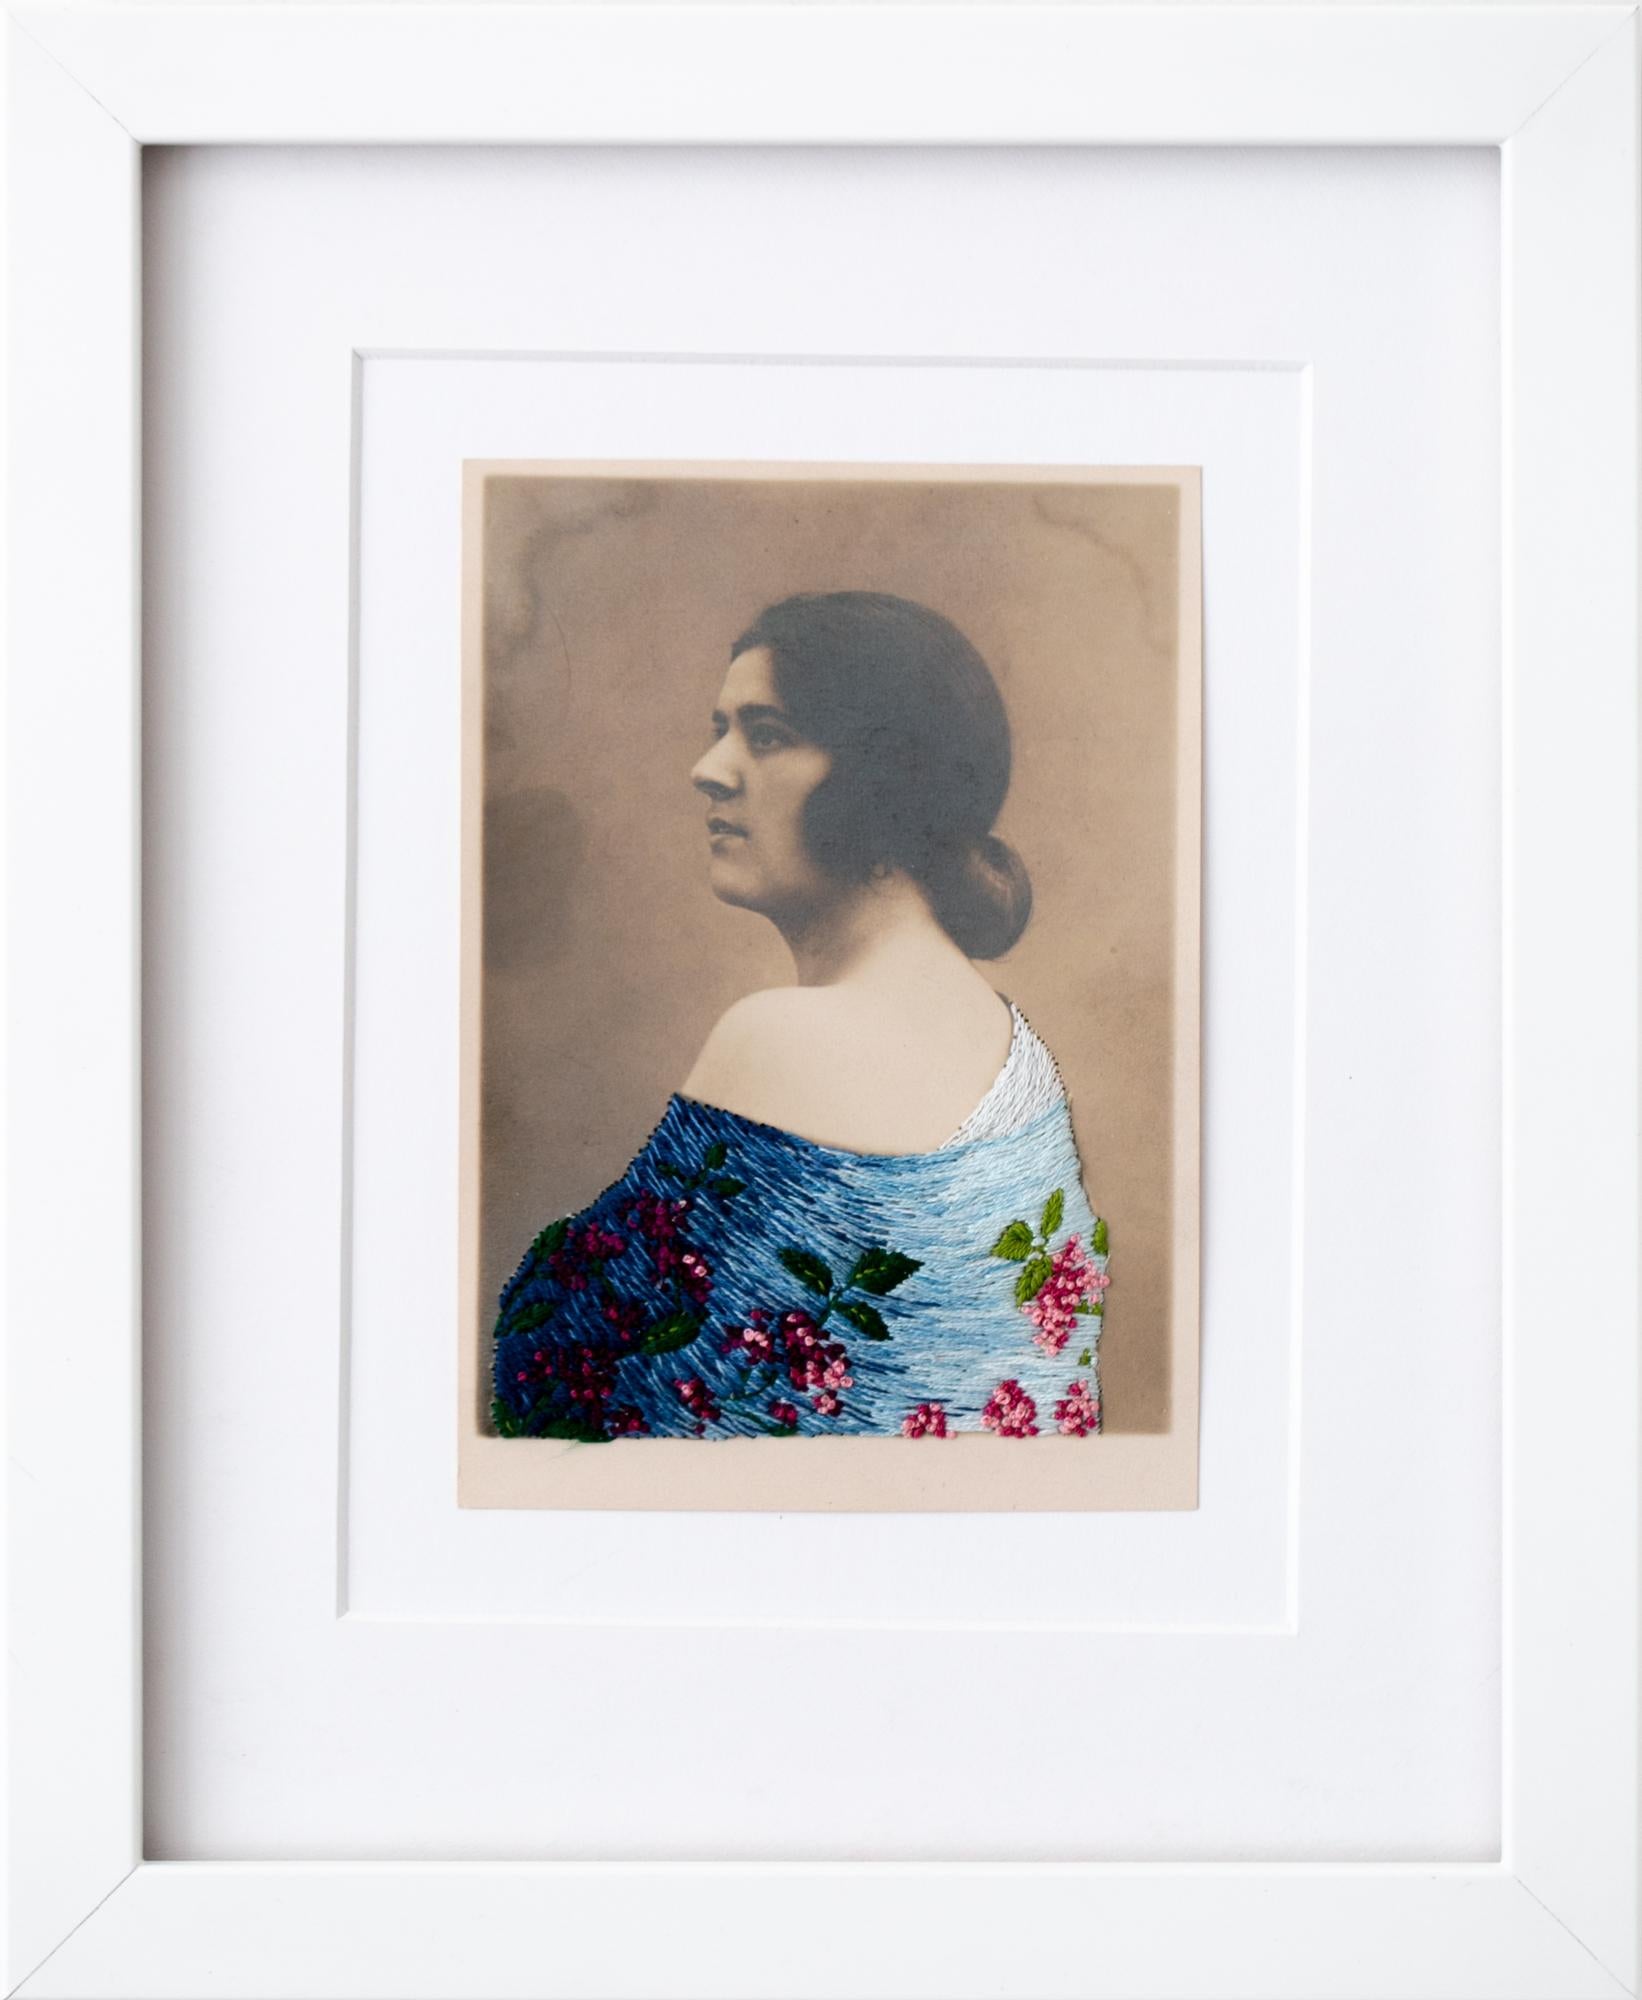 "The shawl", Floral Hand-Embroidered Vintage Photograph, Portrait, Figurative - Art by Han Cao